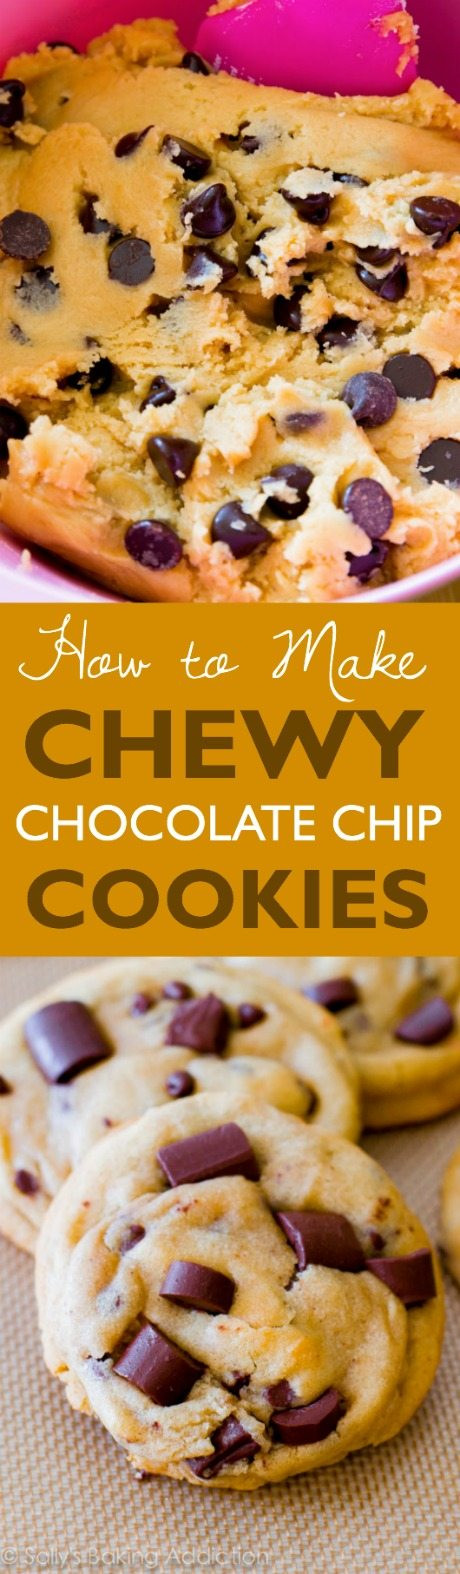 How To Make Chewy Chocolate Chip Cookies
 Chewy Chocolate Chunk Cookies Sallys Baking Addiction